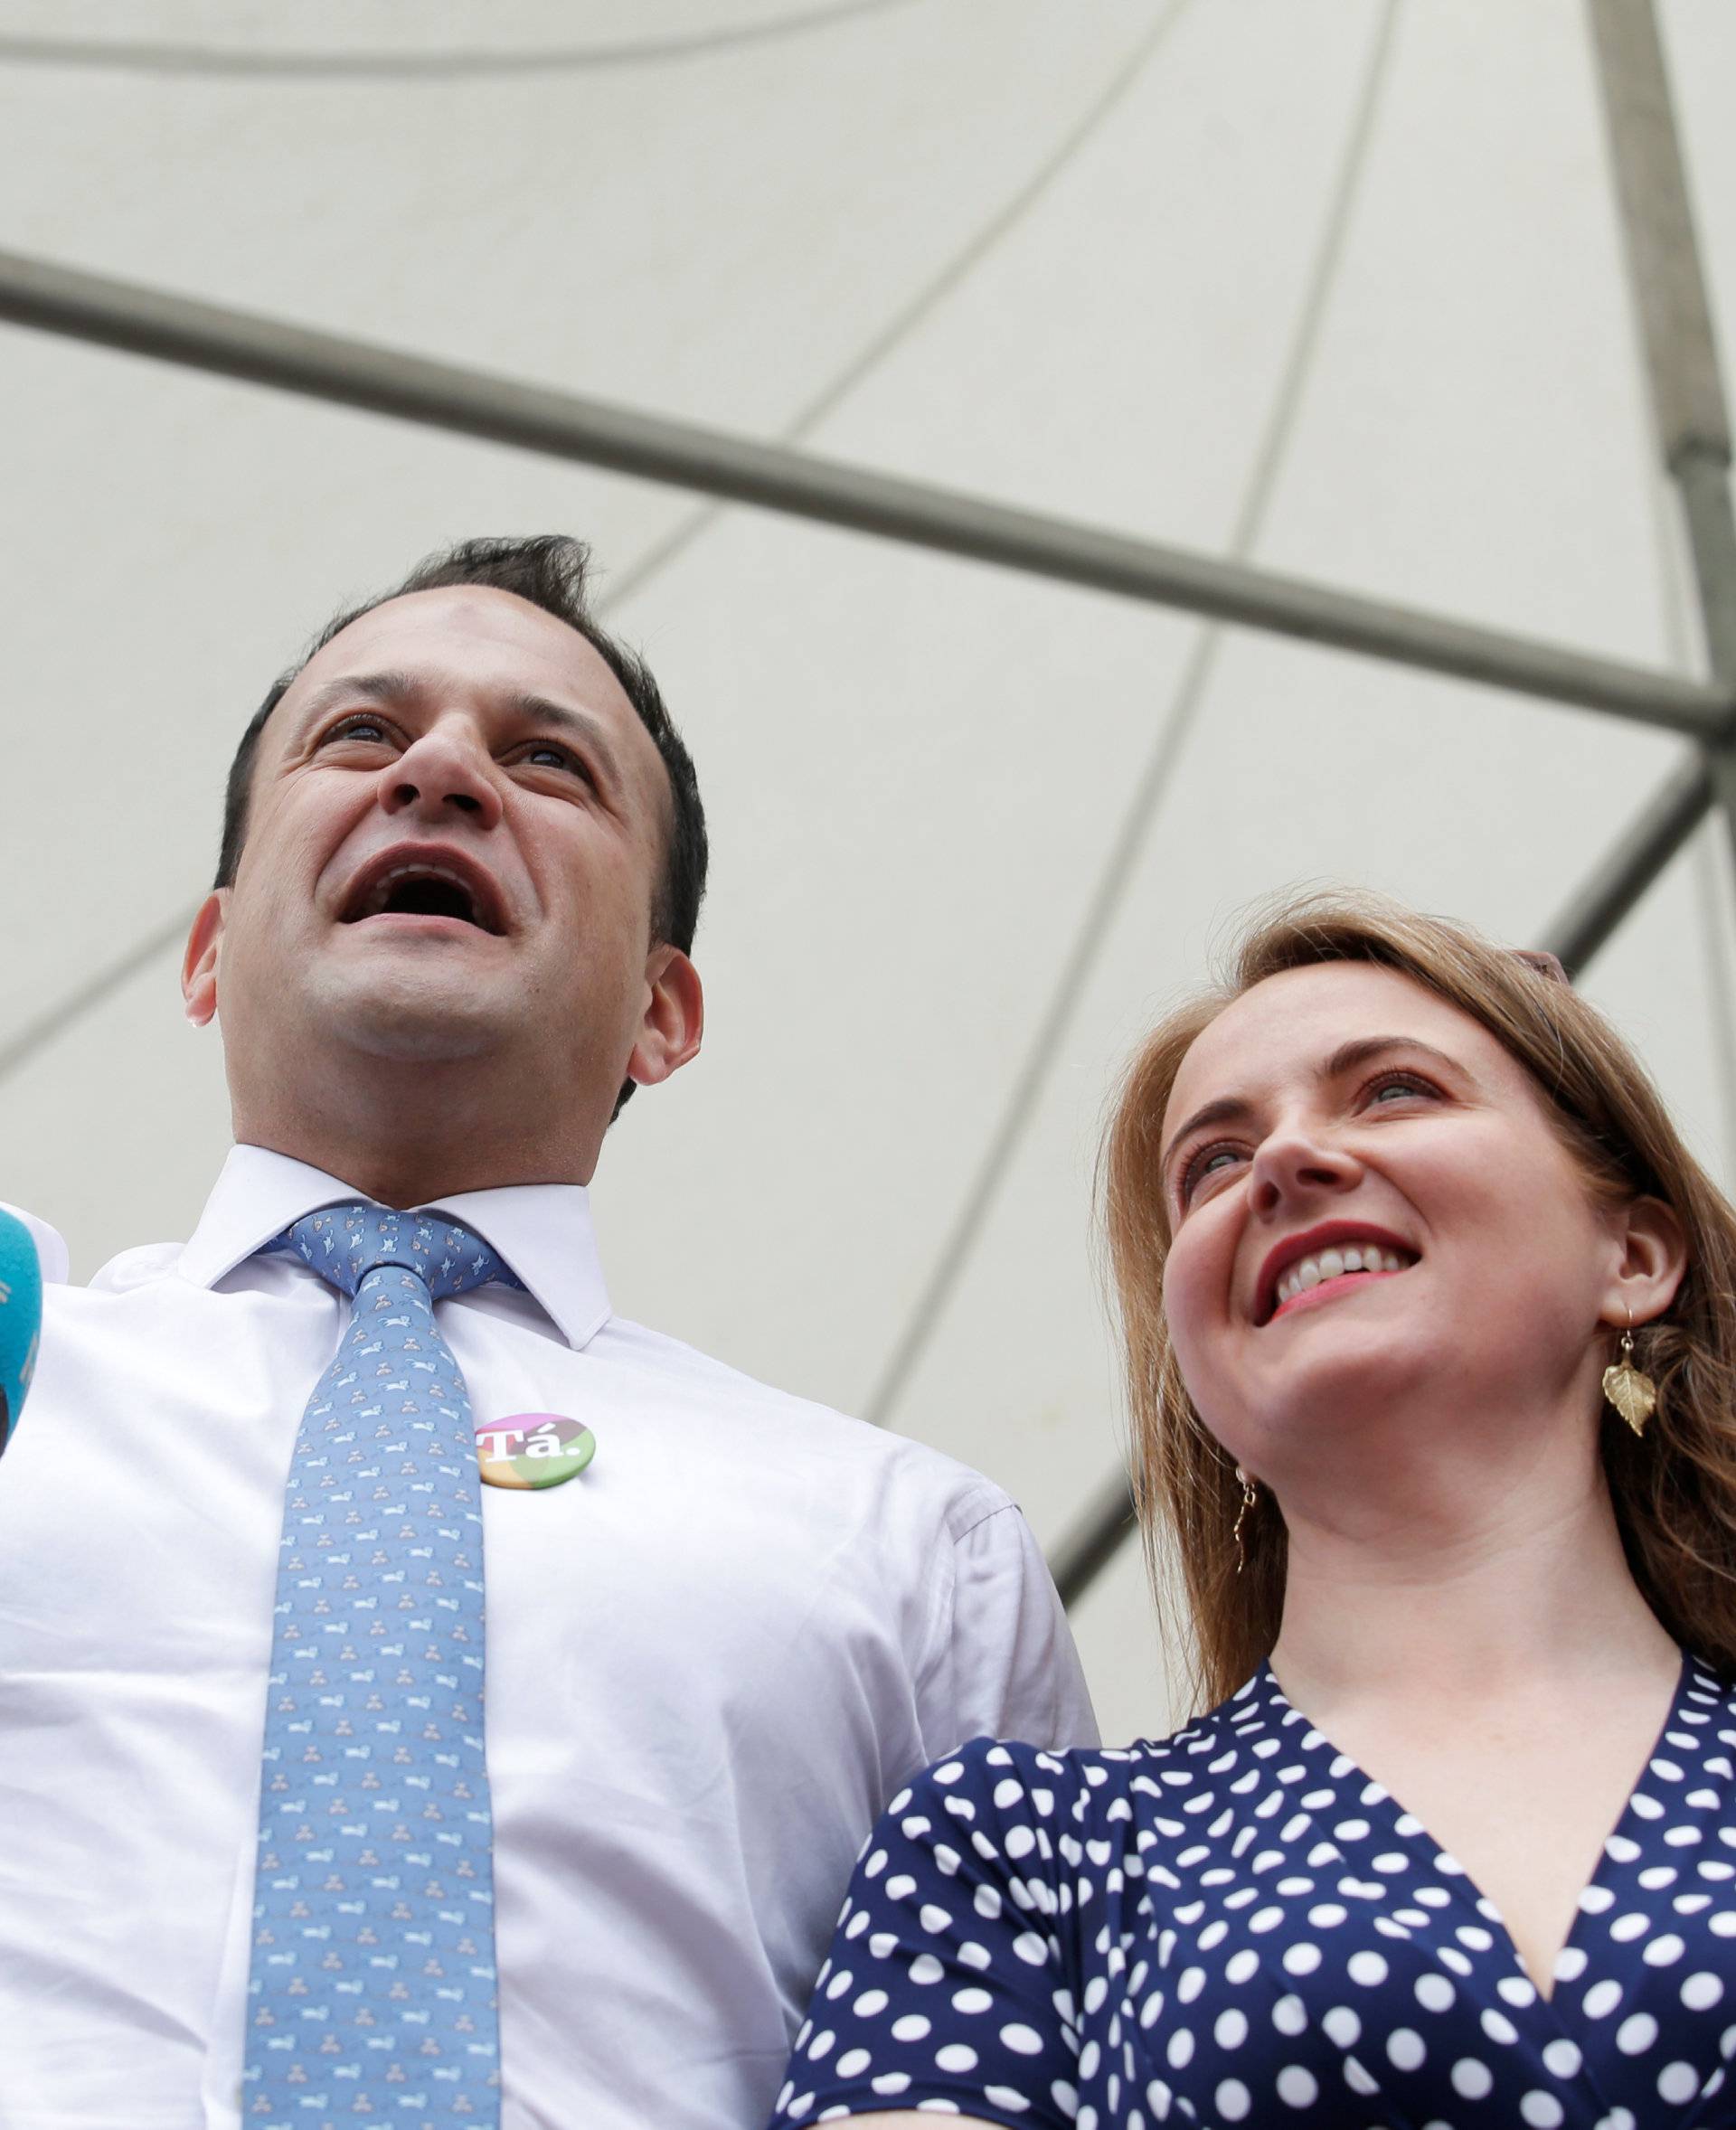 Ireland's Taoiseach Leo Varadkar speaks to a gathering celebrating the result of yesterday's referendum on liberalizing abortion law, in Dublin